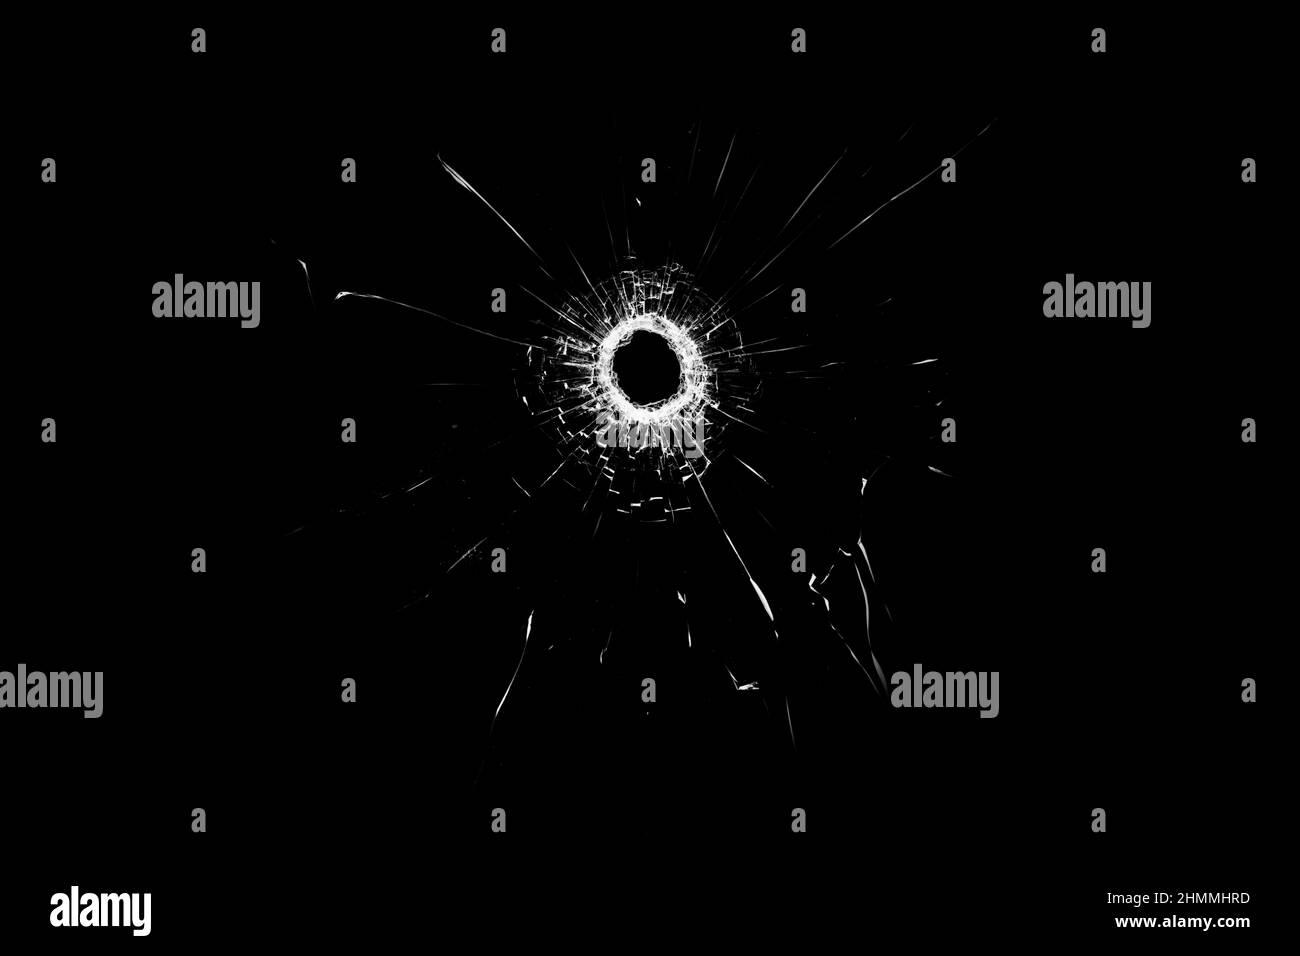 Texture of broken glass. Hole from a ball on a black background. Stock Photo